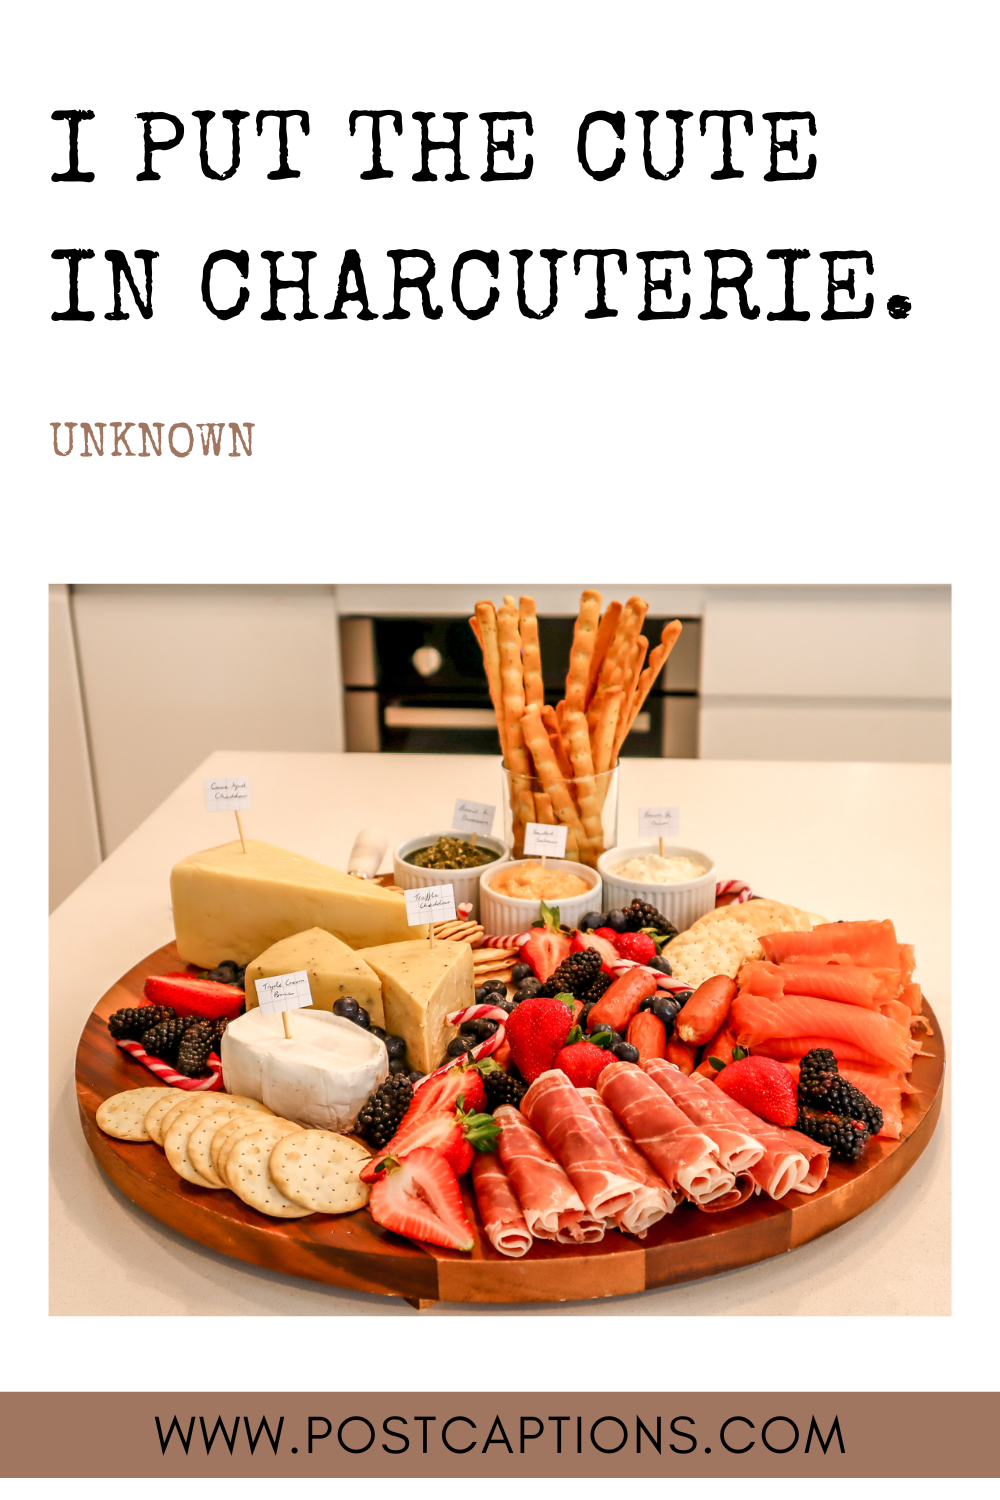 Charcuterie Board Quotes for Instagram